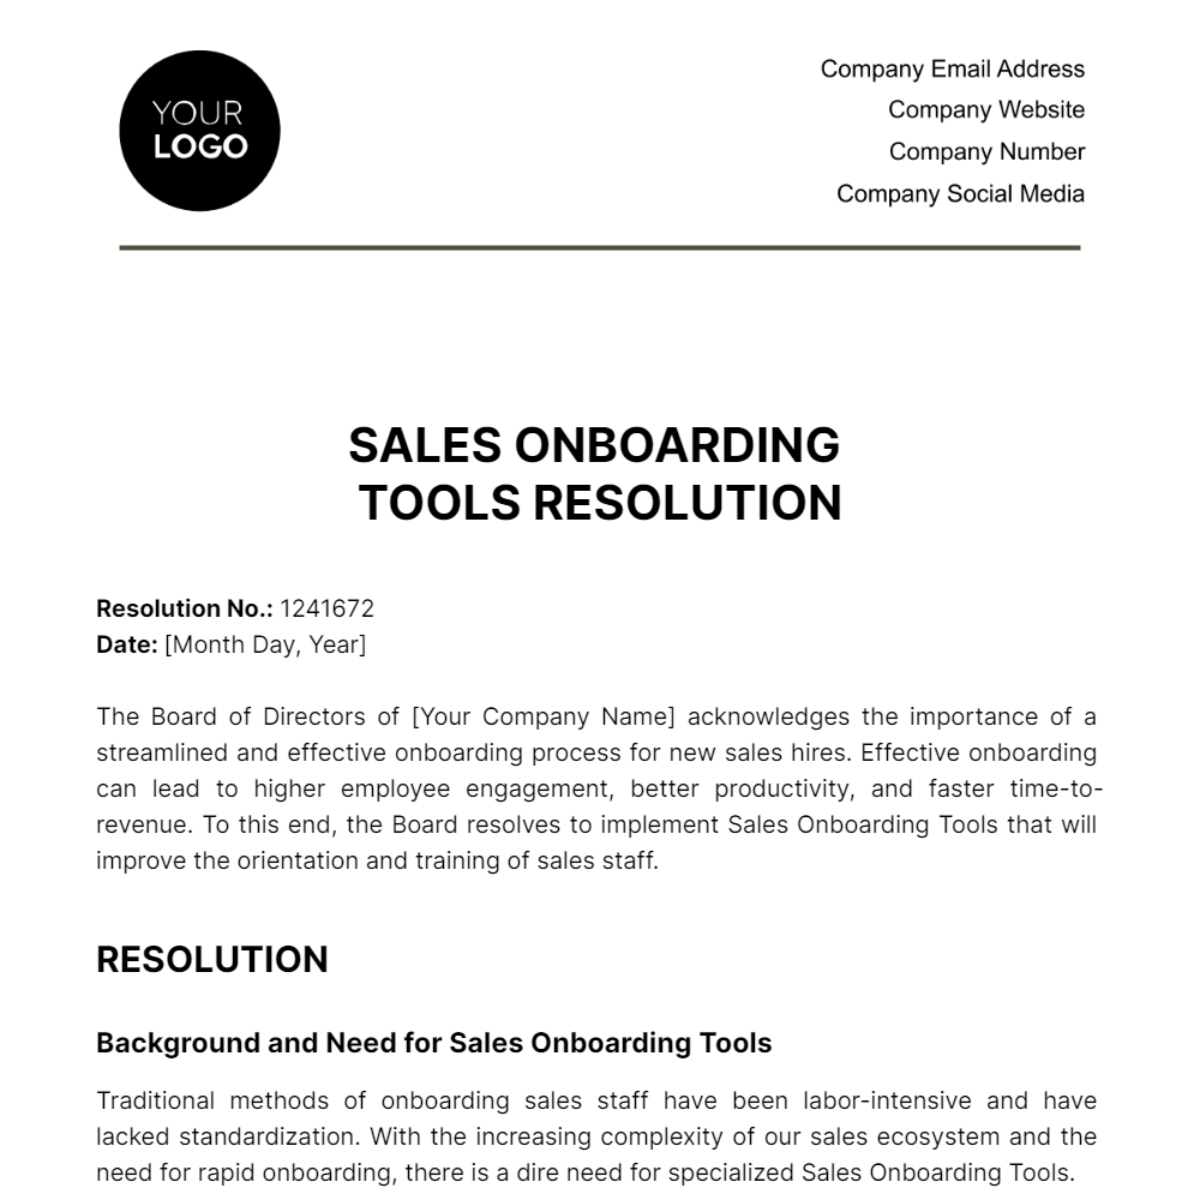 Free Sales Onboarding Tools Resolution Template